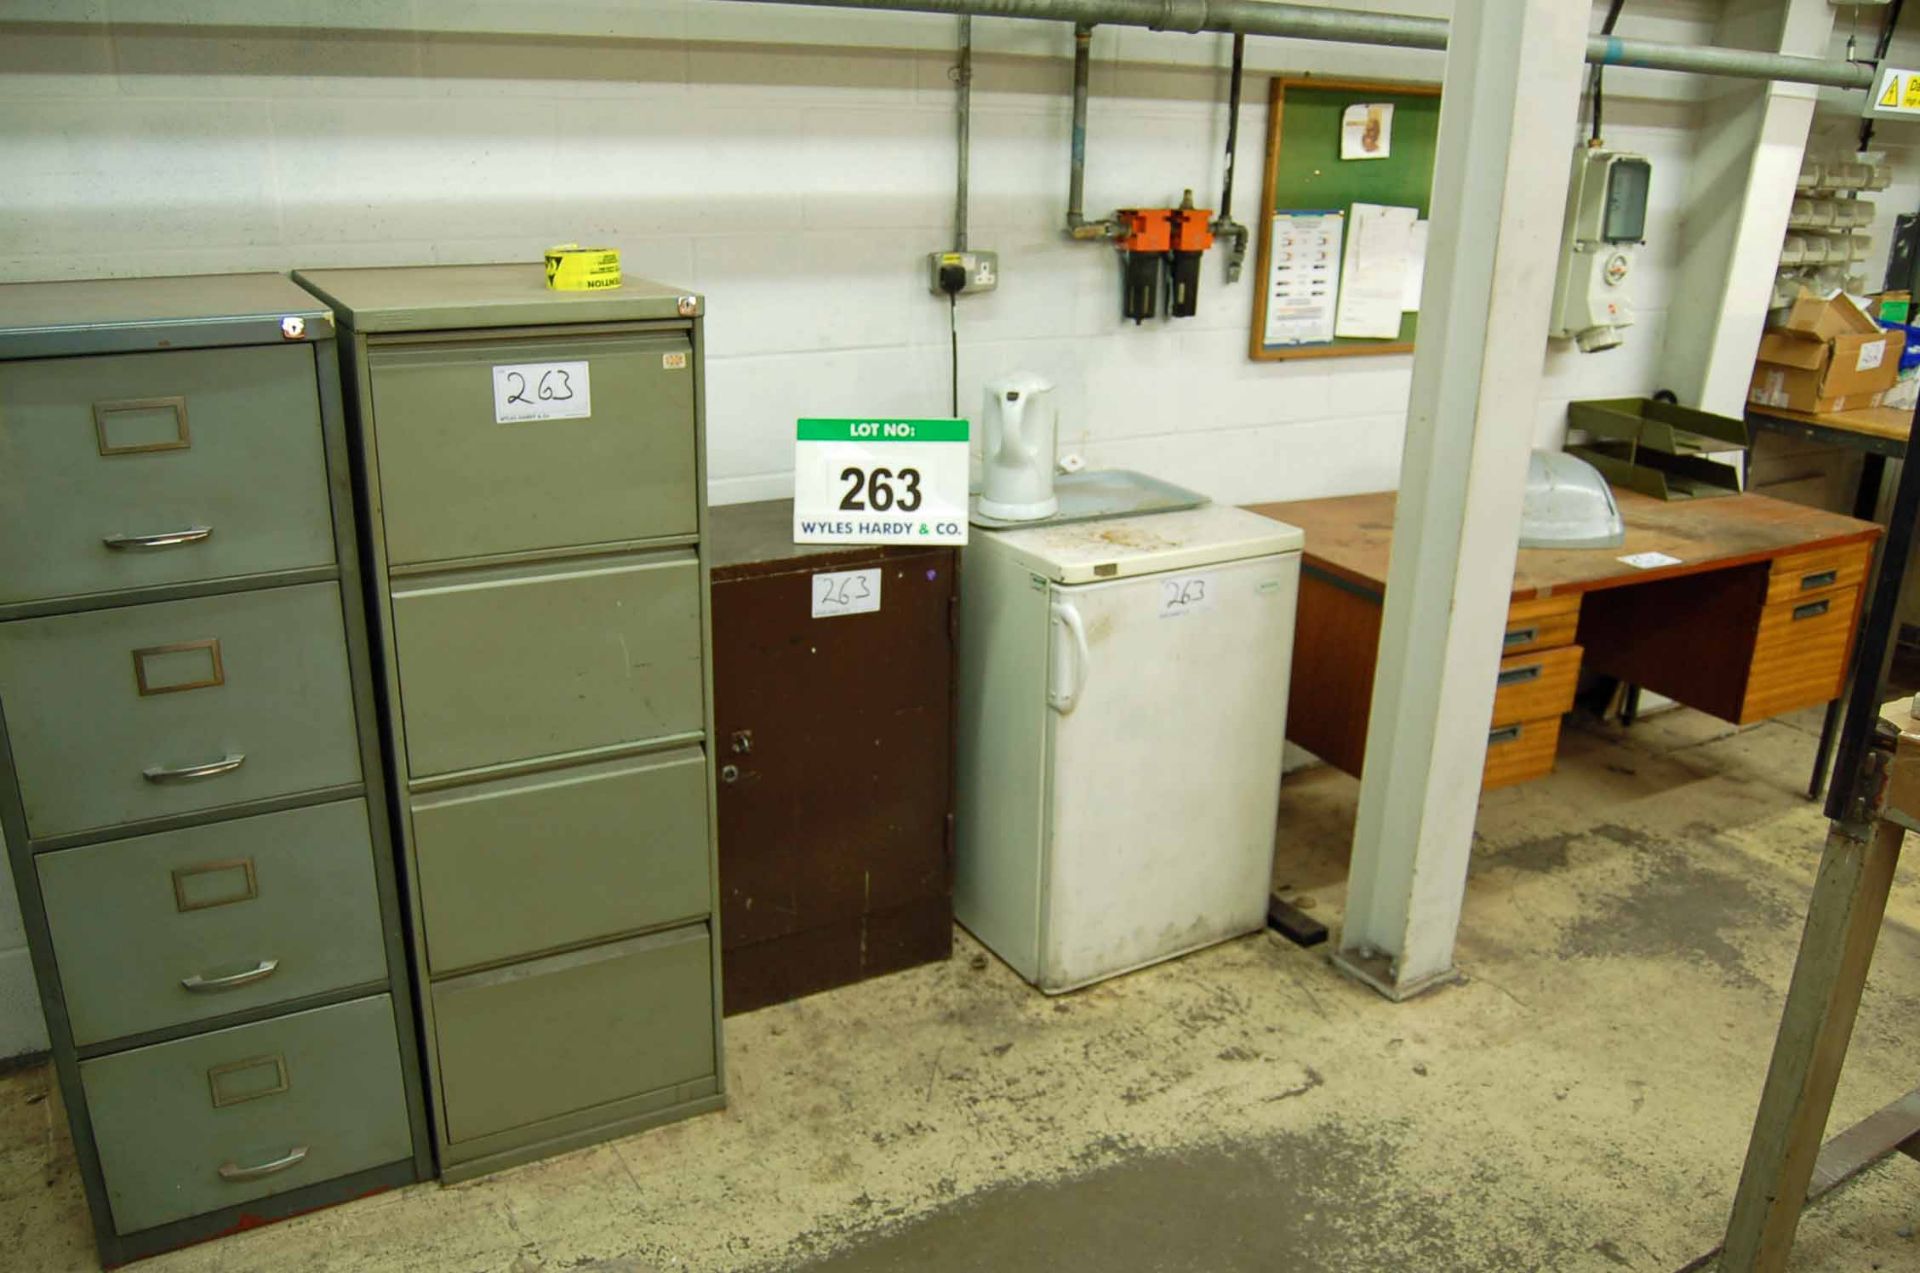 A Quantity of Workshop Furniture Including 2 Four-Drawer Filing Cabinets, Steel Locker, An